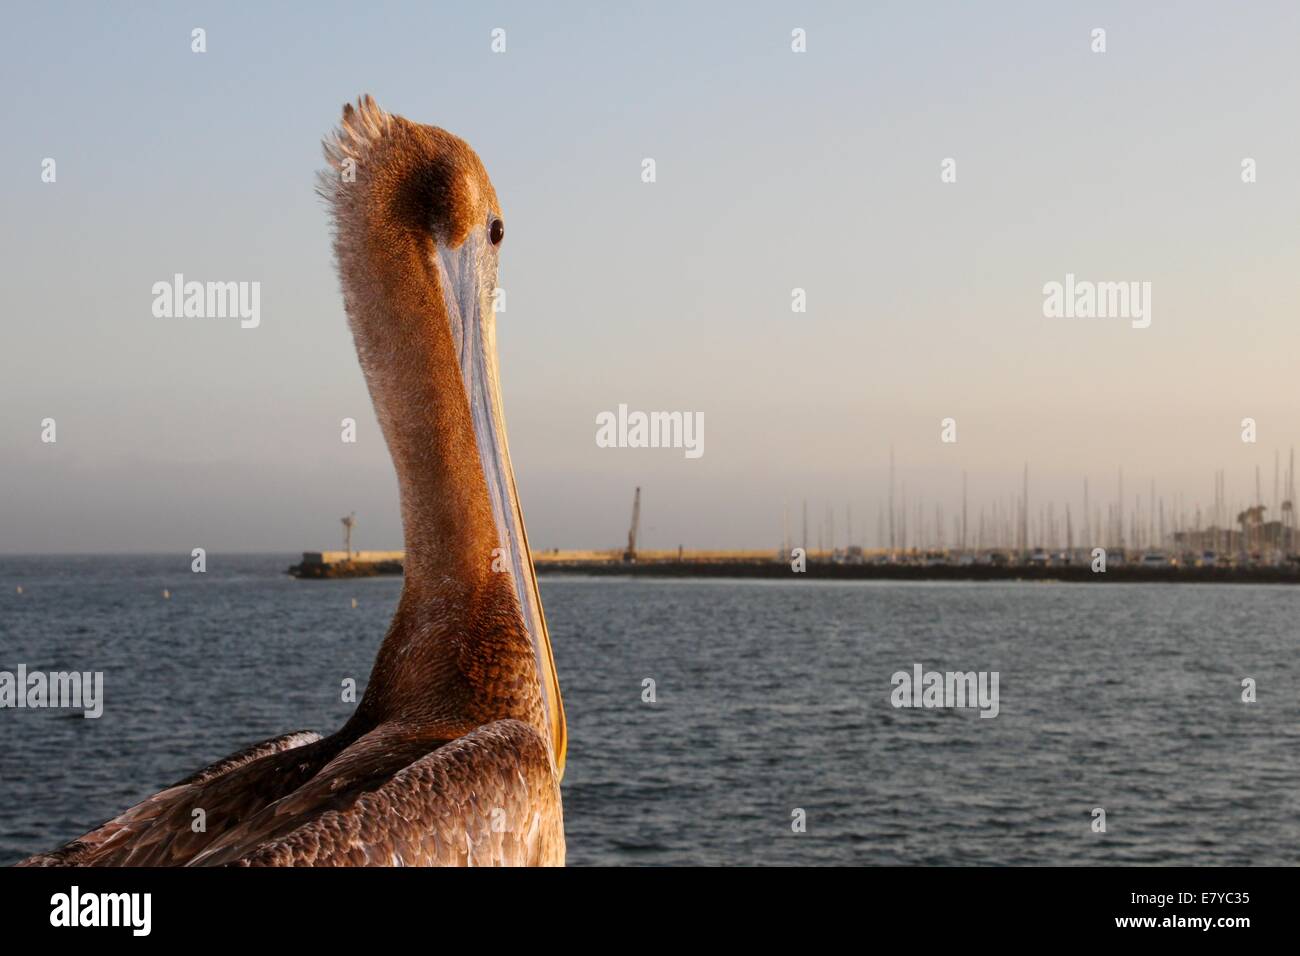 Pelican at Sunset Stock Photo